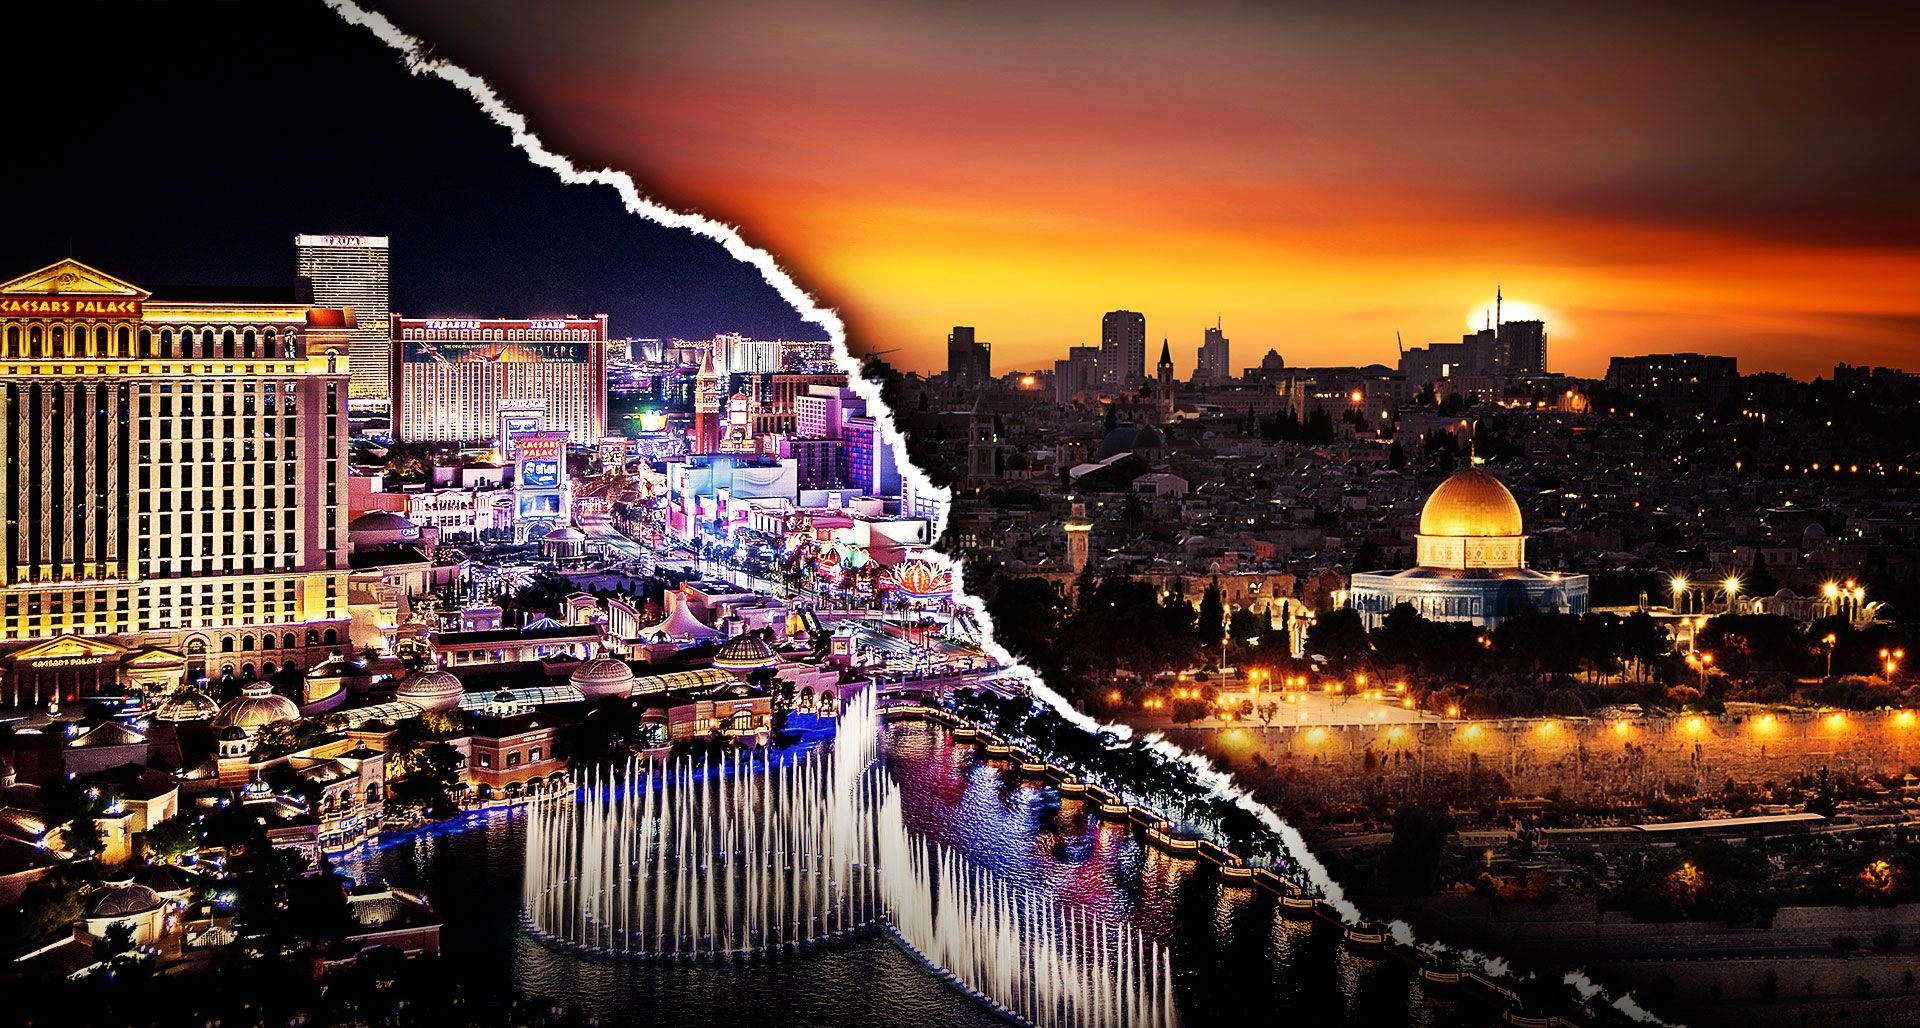 From Vegas to Jerusalem: Global Violence Continues with Silence | HonestReporting – Honestreporting.com